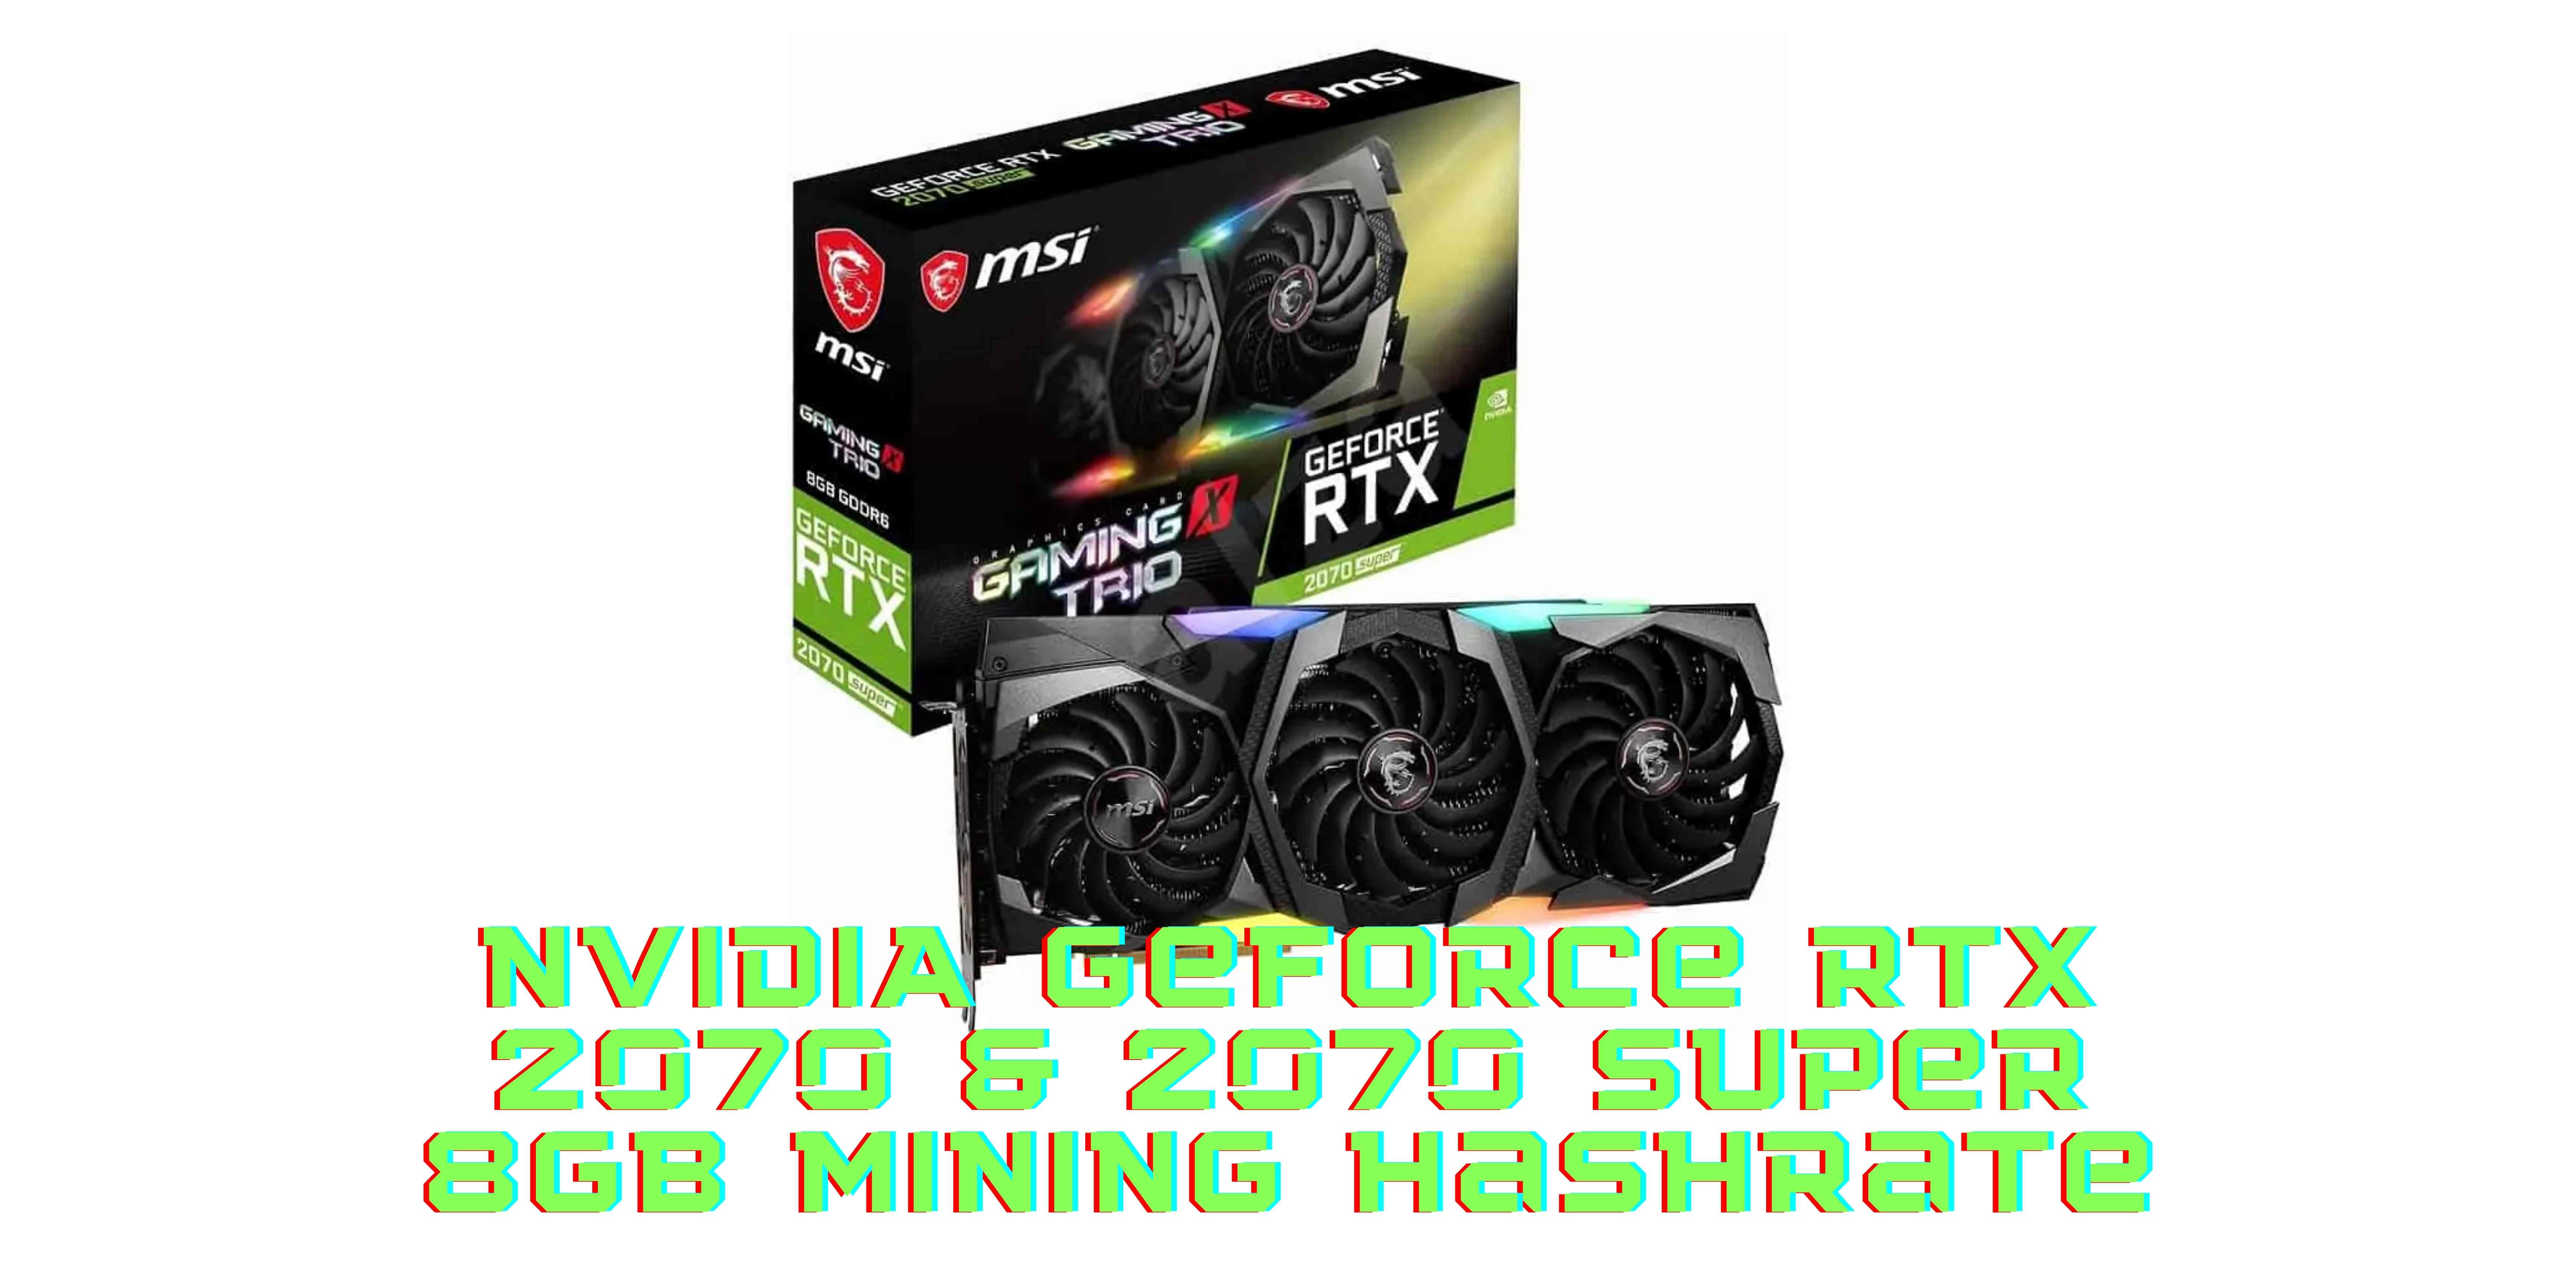 NVIDIA RTX 2070 & 2070 Super Hashrate Performance And Best Overclock Settings For ETH Mining